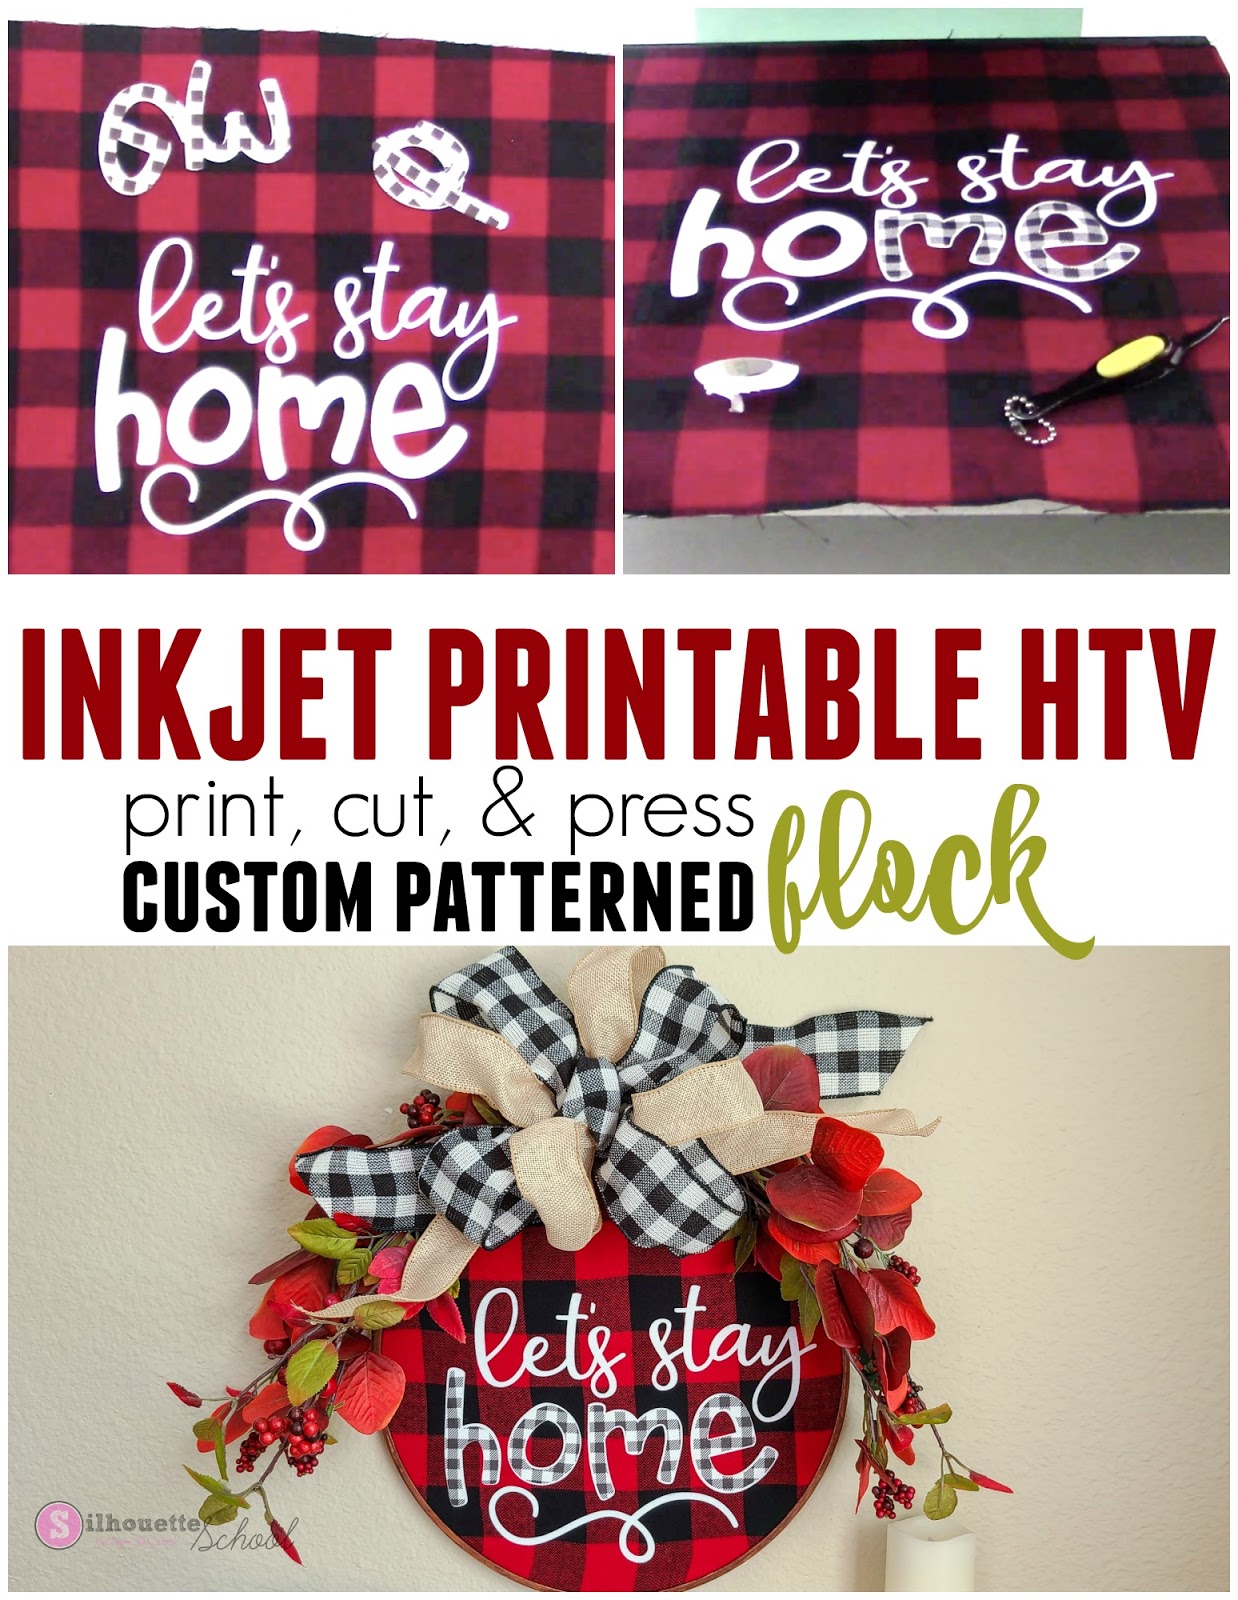 How to Print on Printable HTV with an Inkjet Printer - So Fontsy